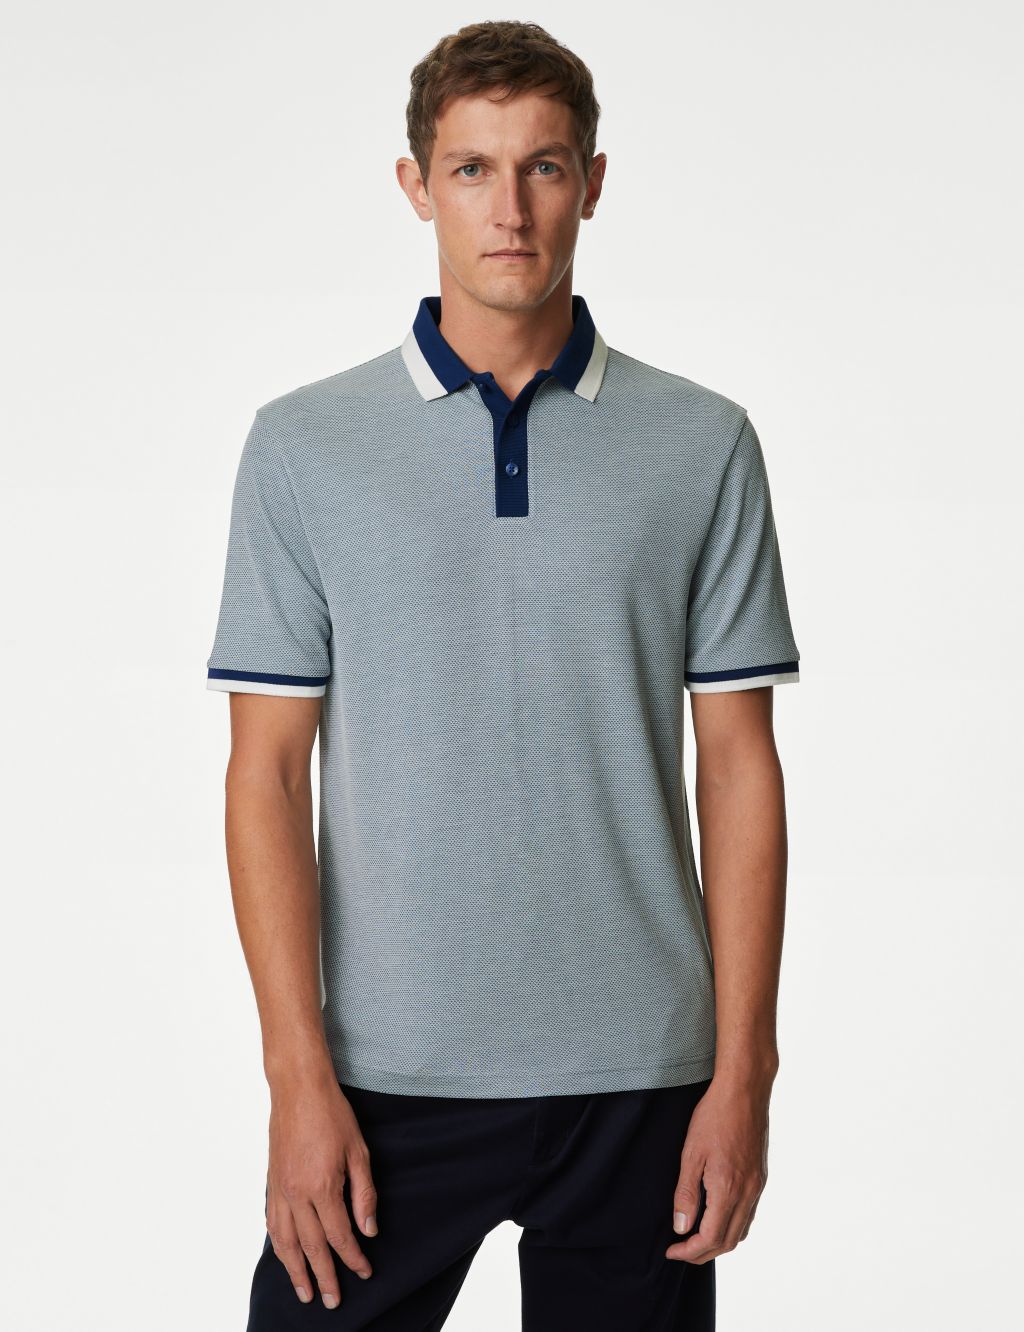 Men’s Short-sleeved Polo Shirts | M&S